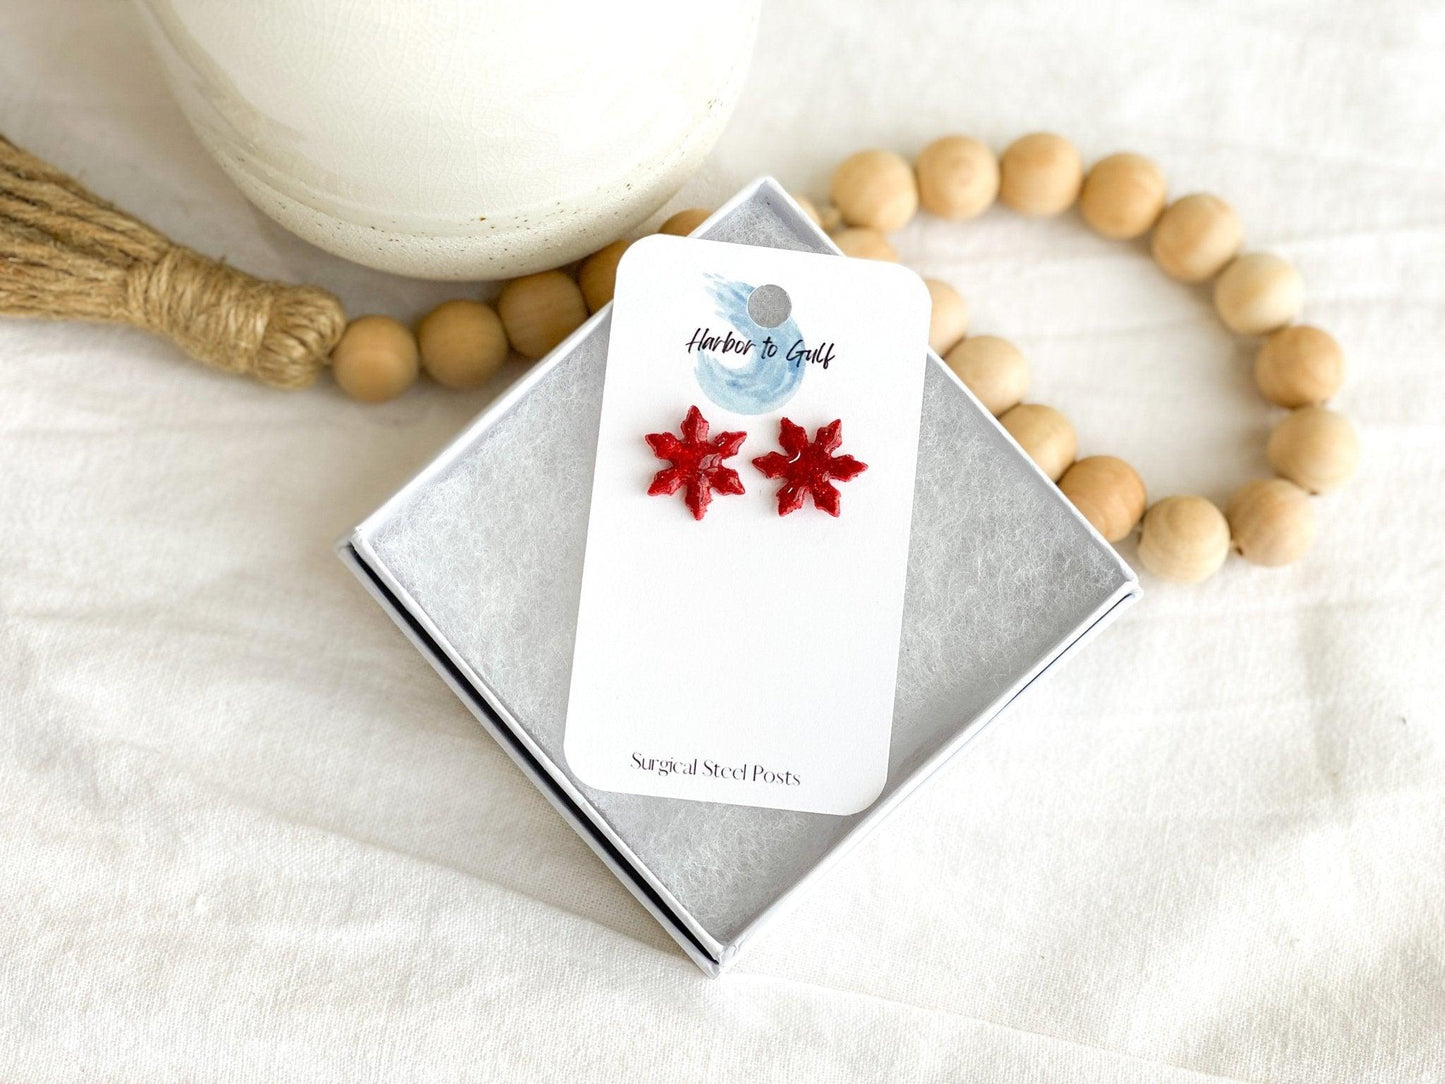 Small Handmade Red Sparkly Snowflake Stud Earrings on wihte earring card in white gift box propped on strand of wood beads